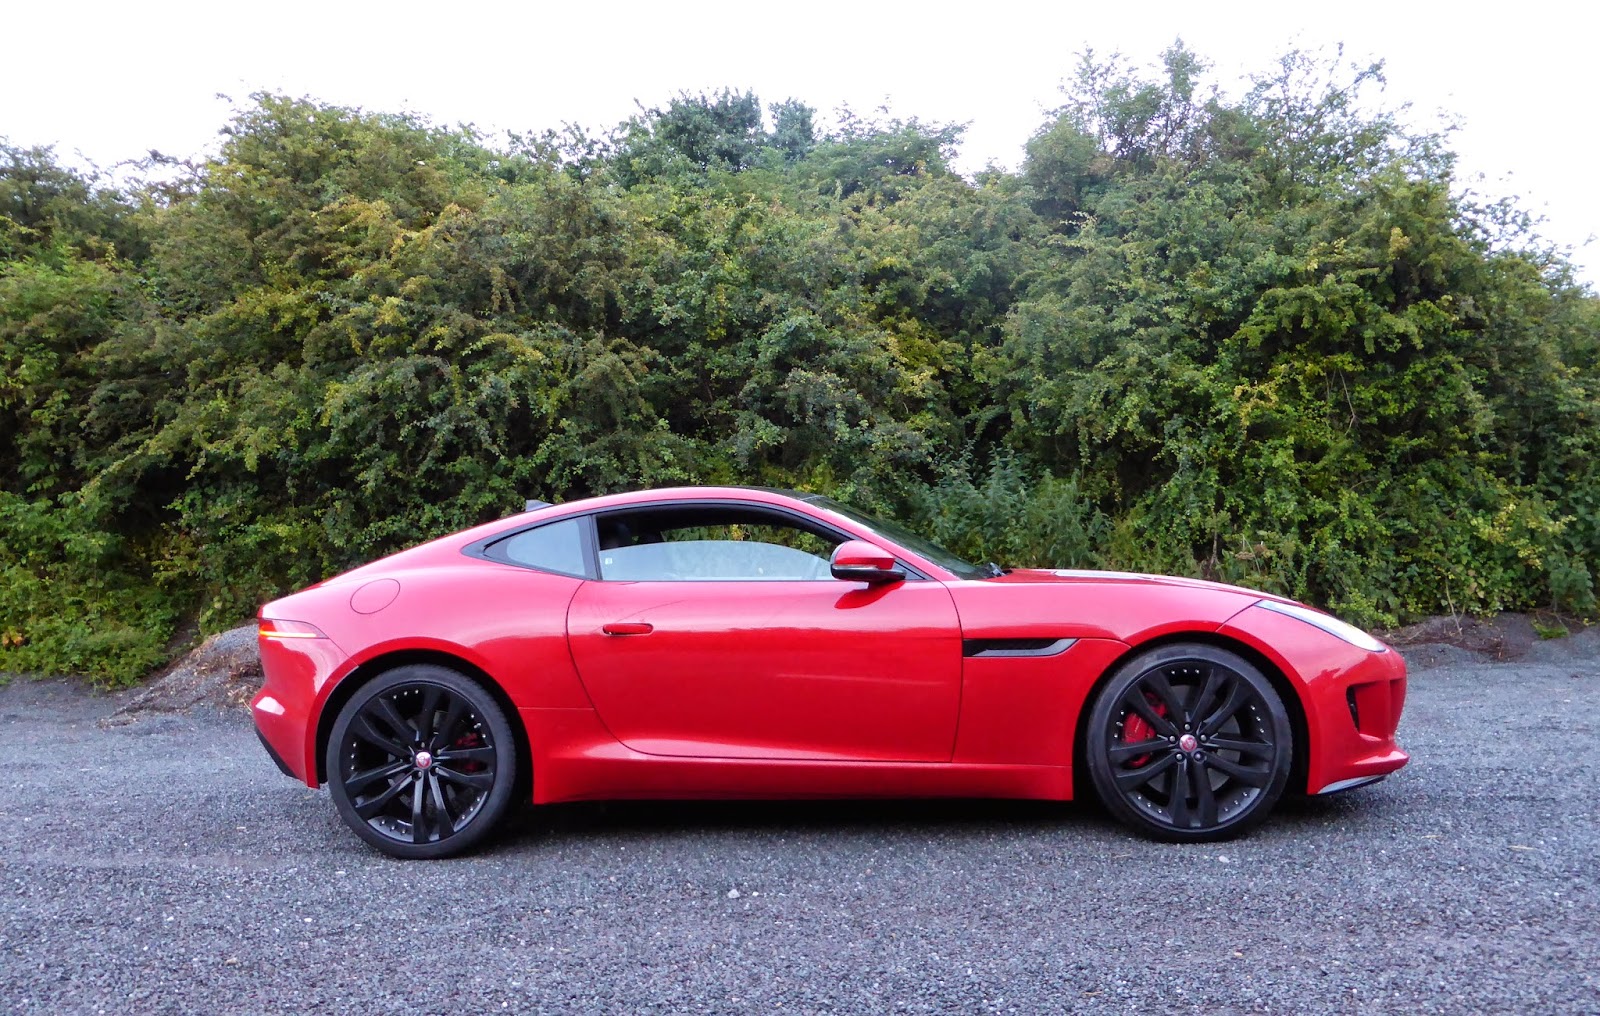 2014 Jaguar F-Type Coupe V6 S Review - The Crittenden ...